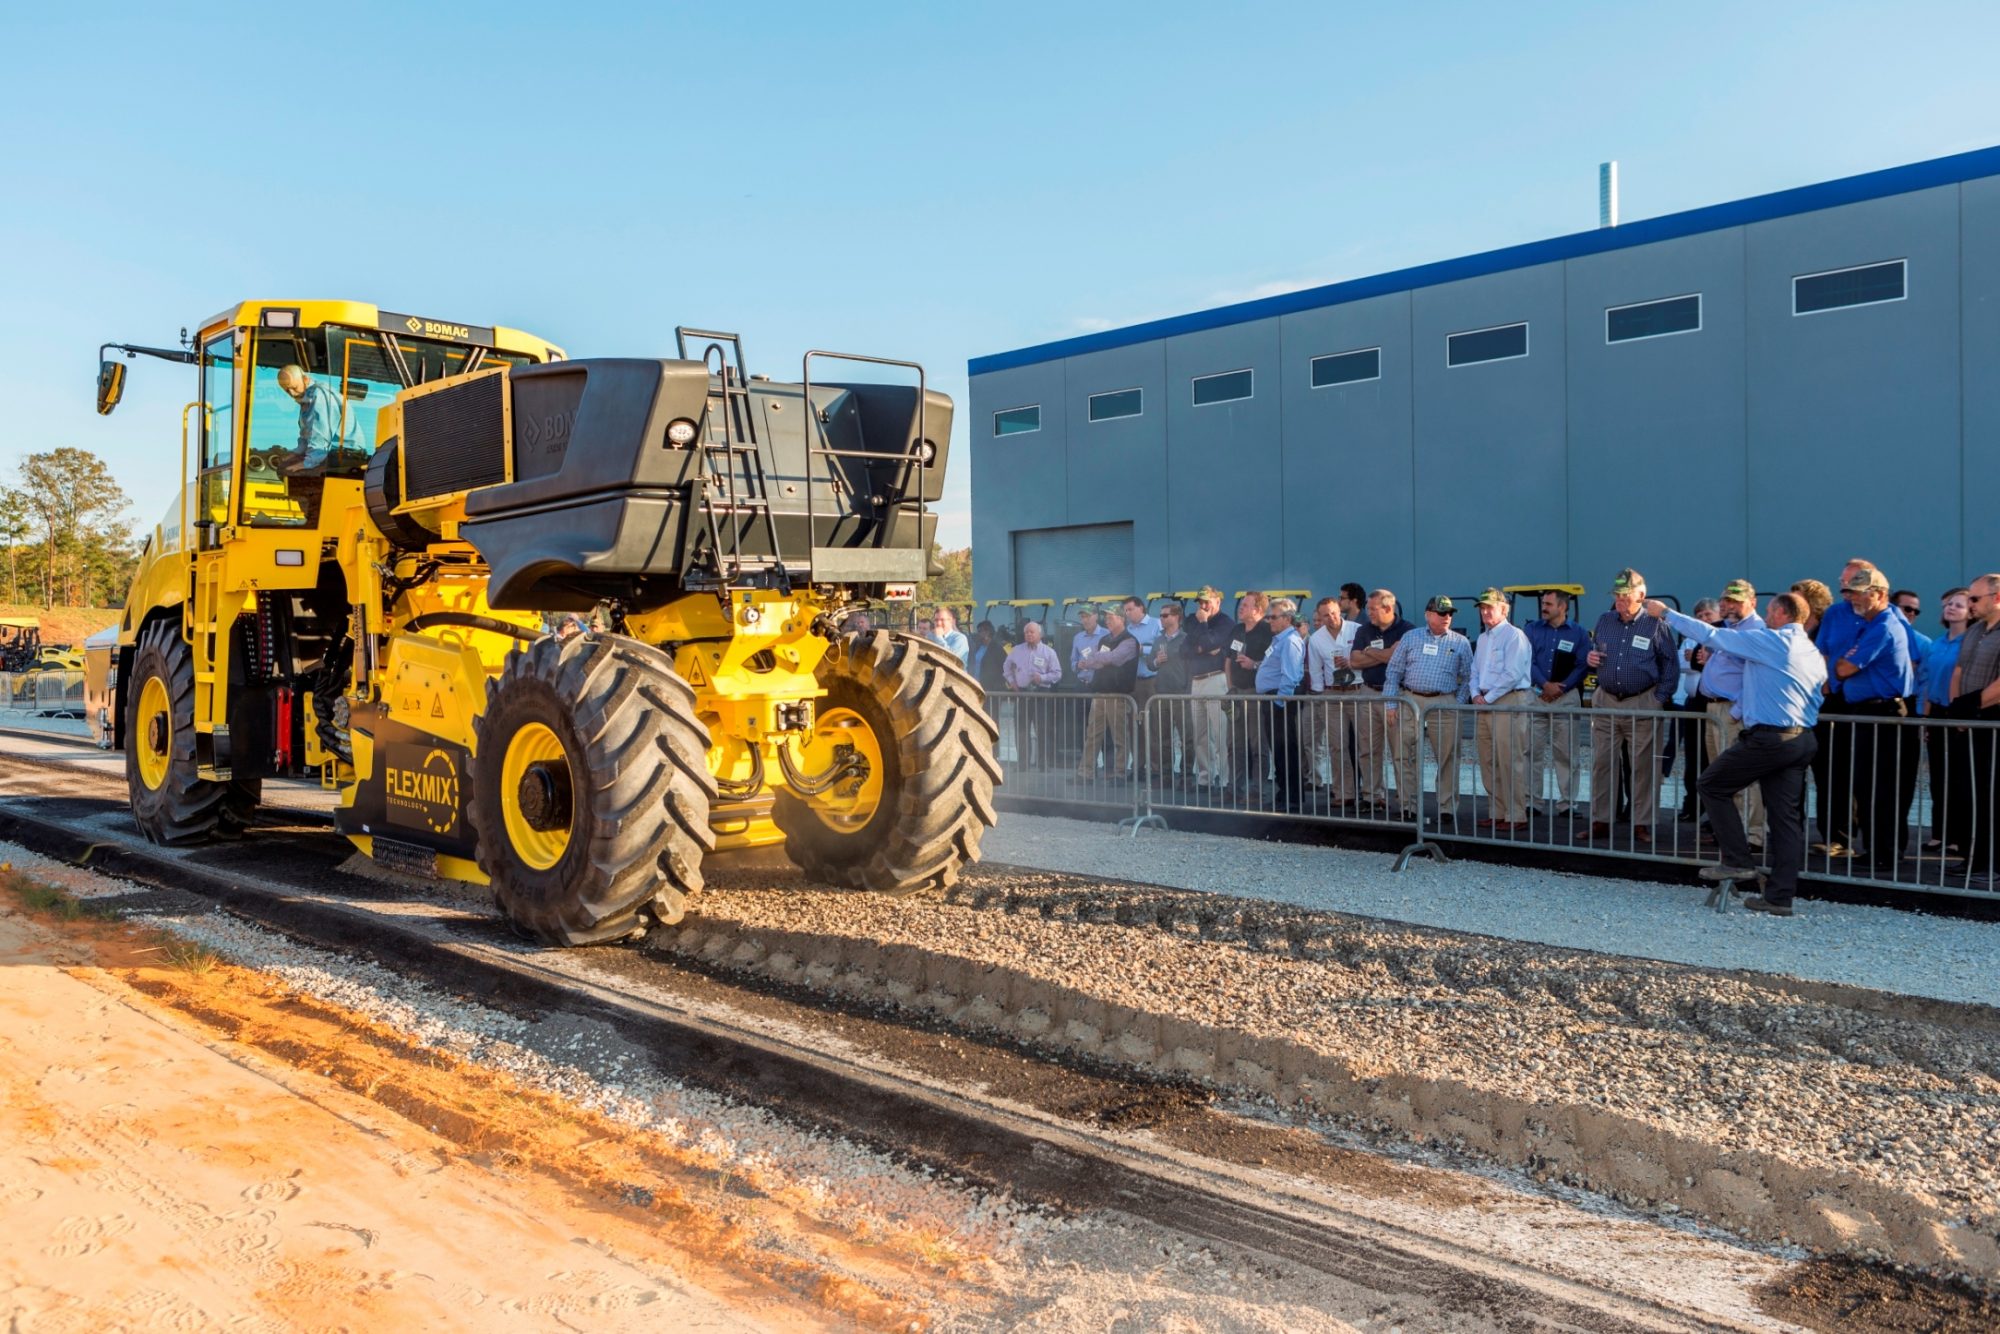 The RS500 from BOMAG Americas has a forward operating speed of up to 164 feet per minute, and uses variable rotor speeds from 100 to 180 rpm to match rotor speed to the application.